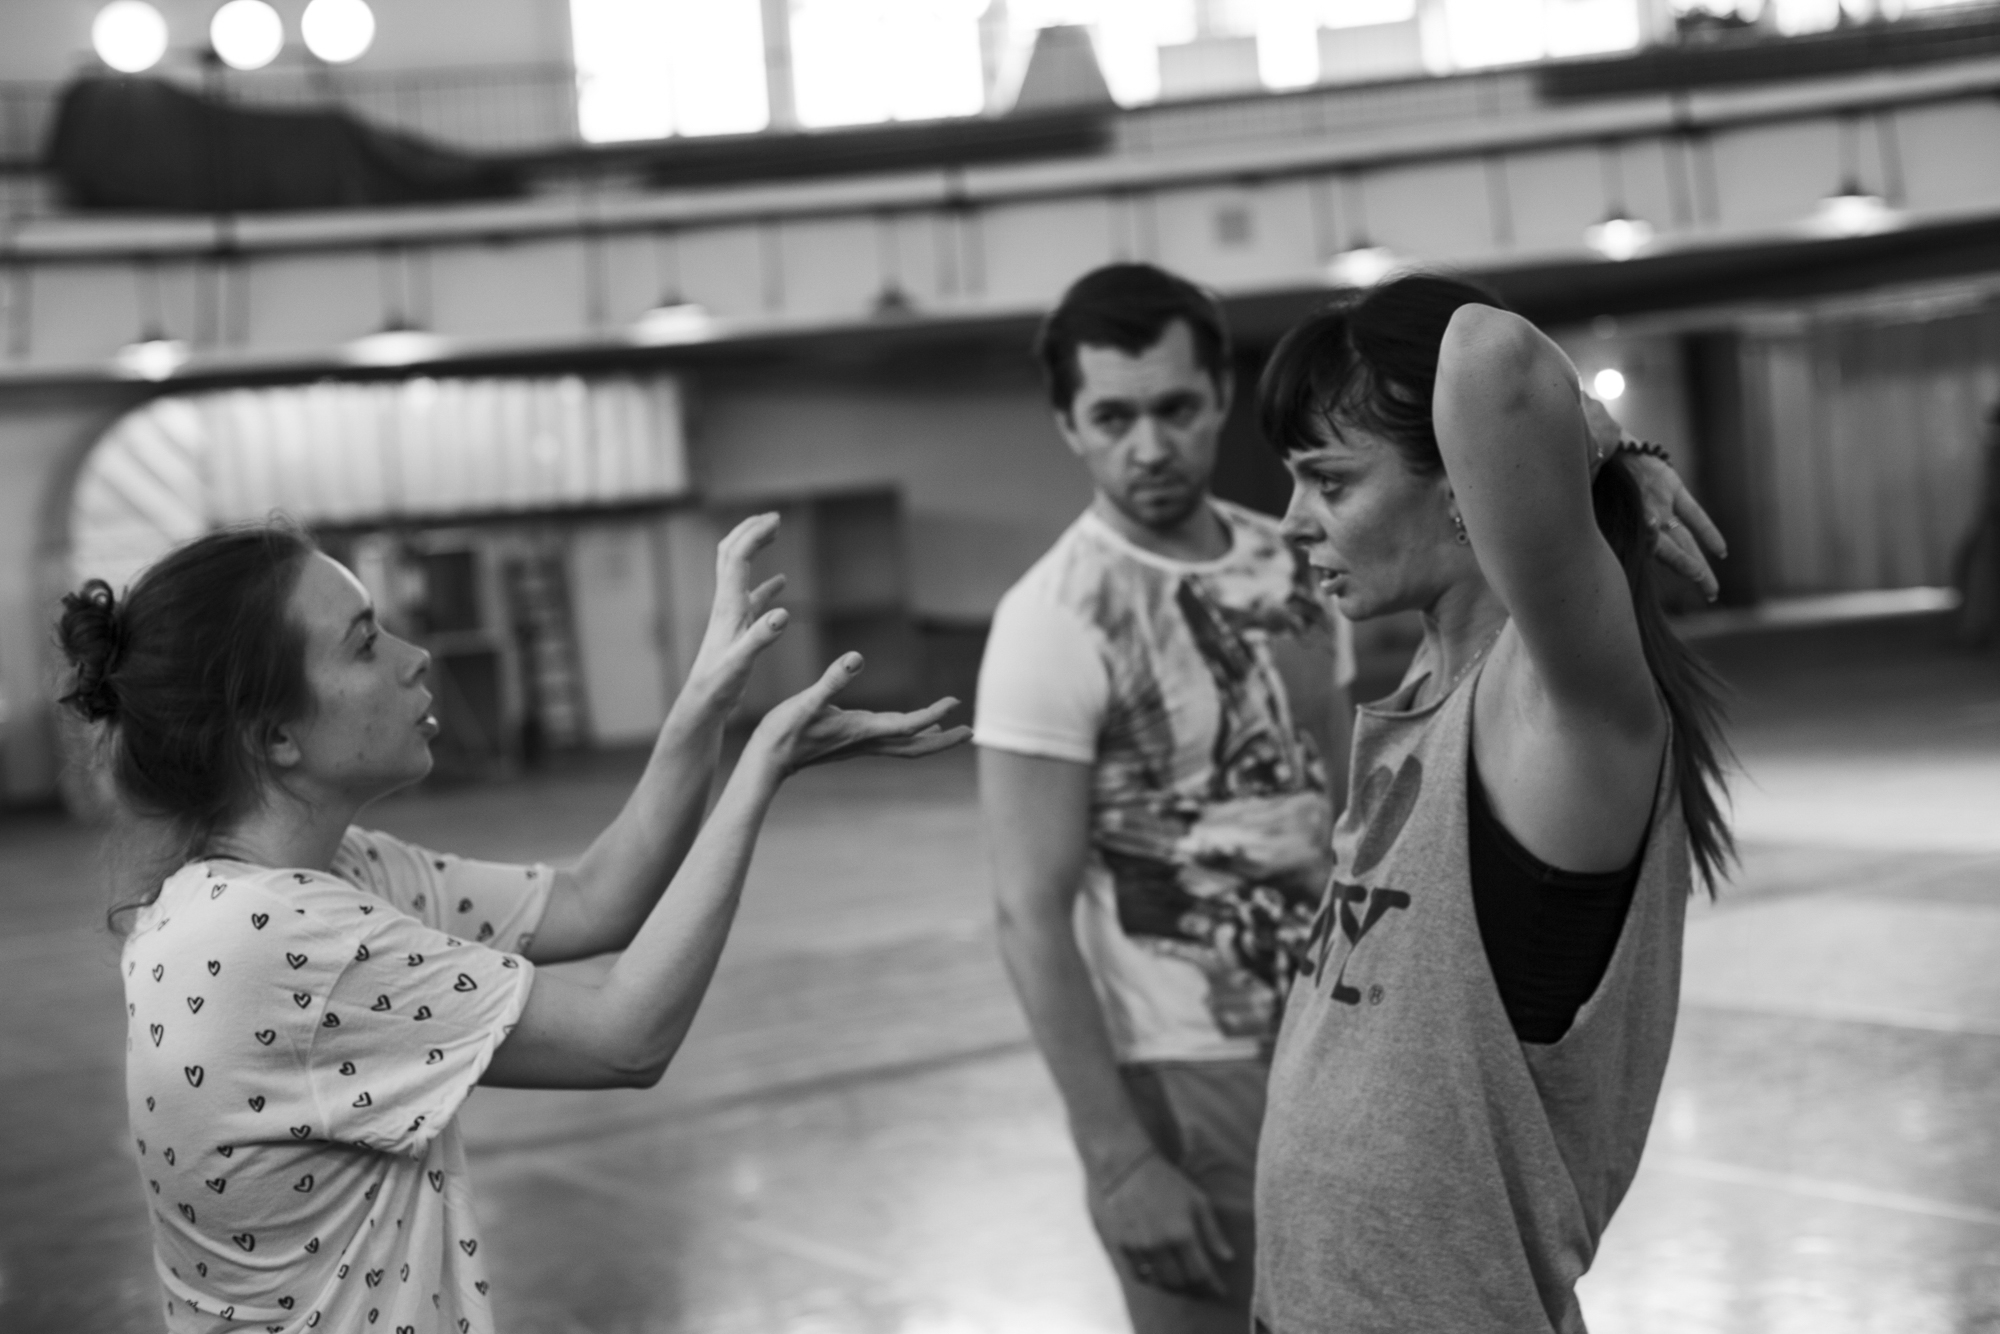 A couple of dancers watch and listen as choreographer gives them pointers.